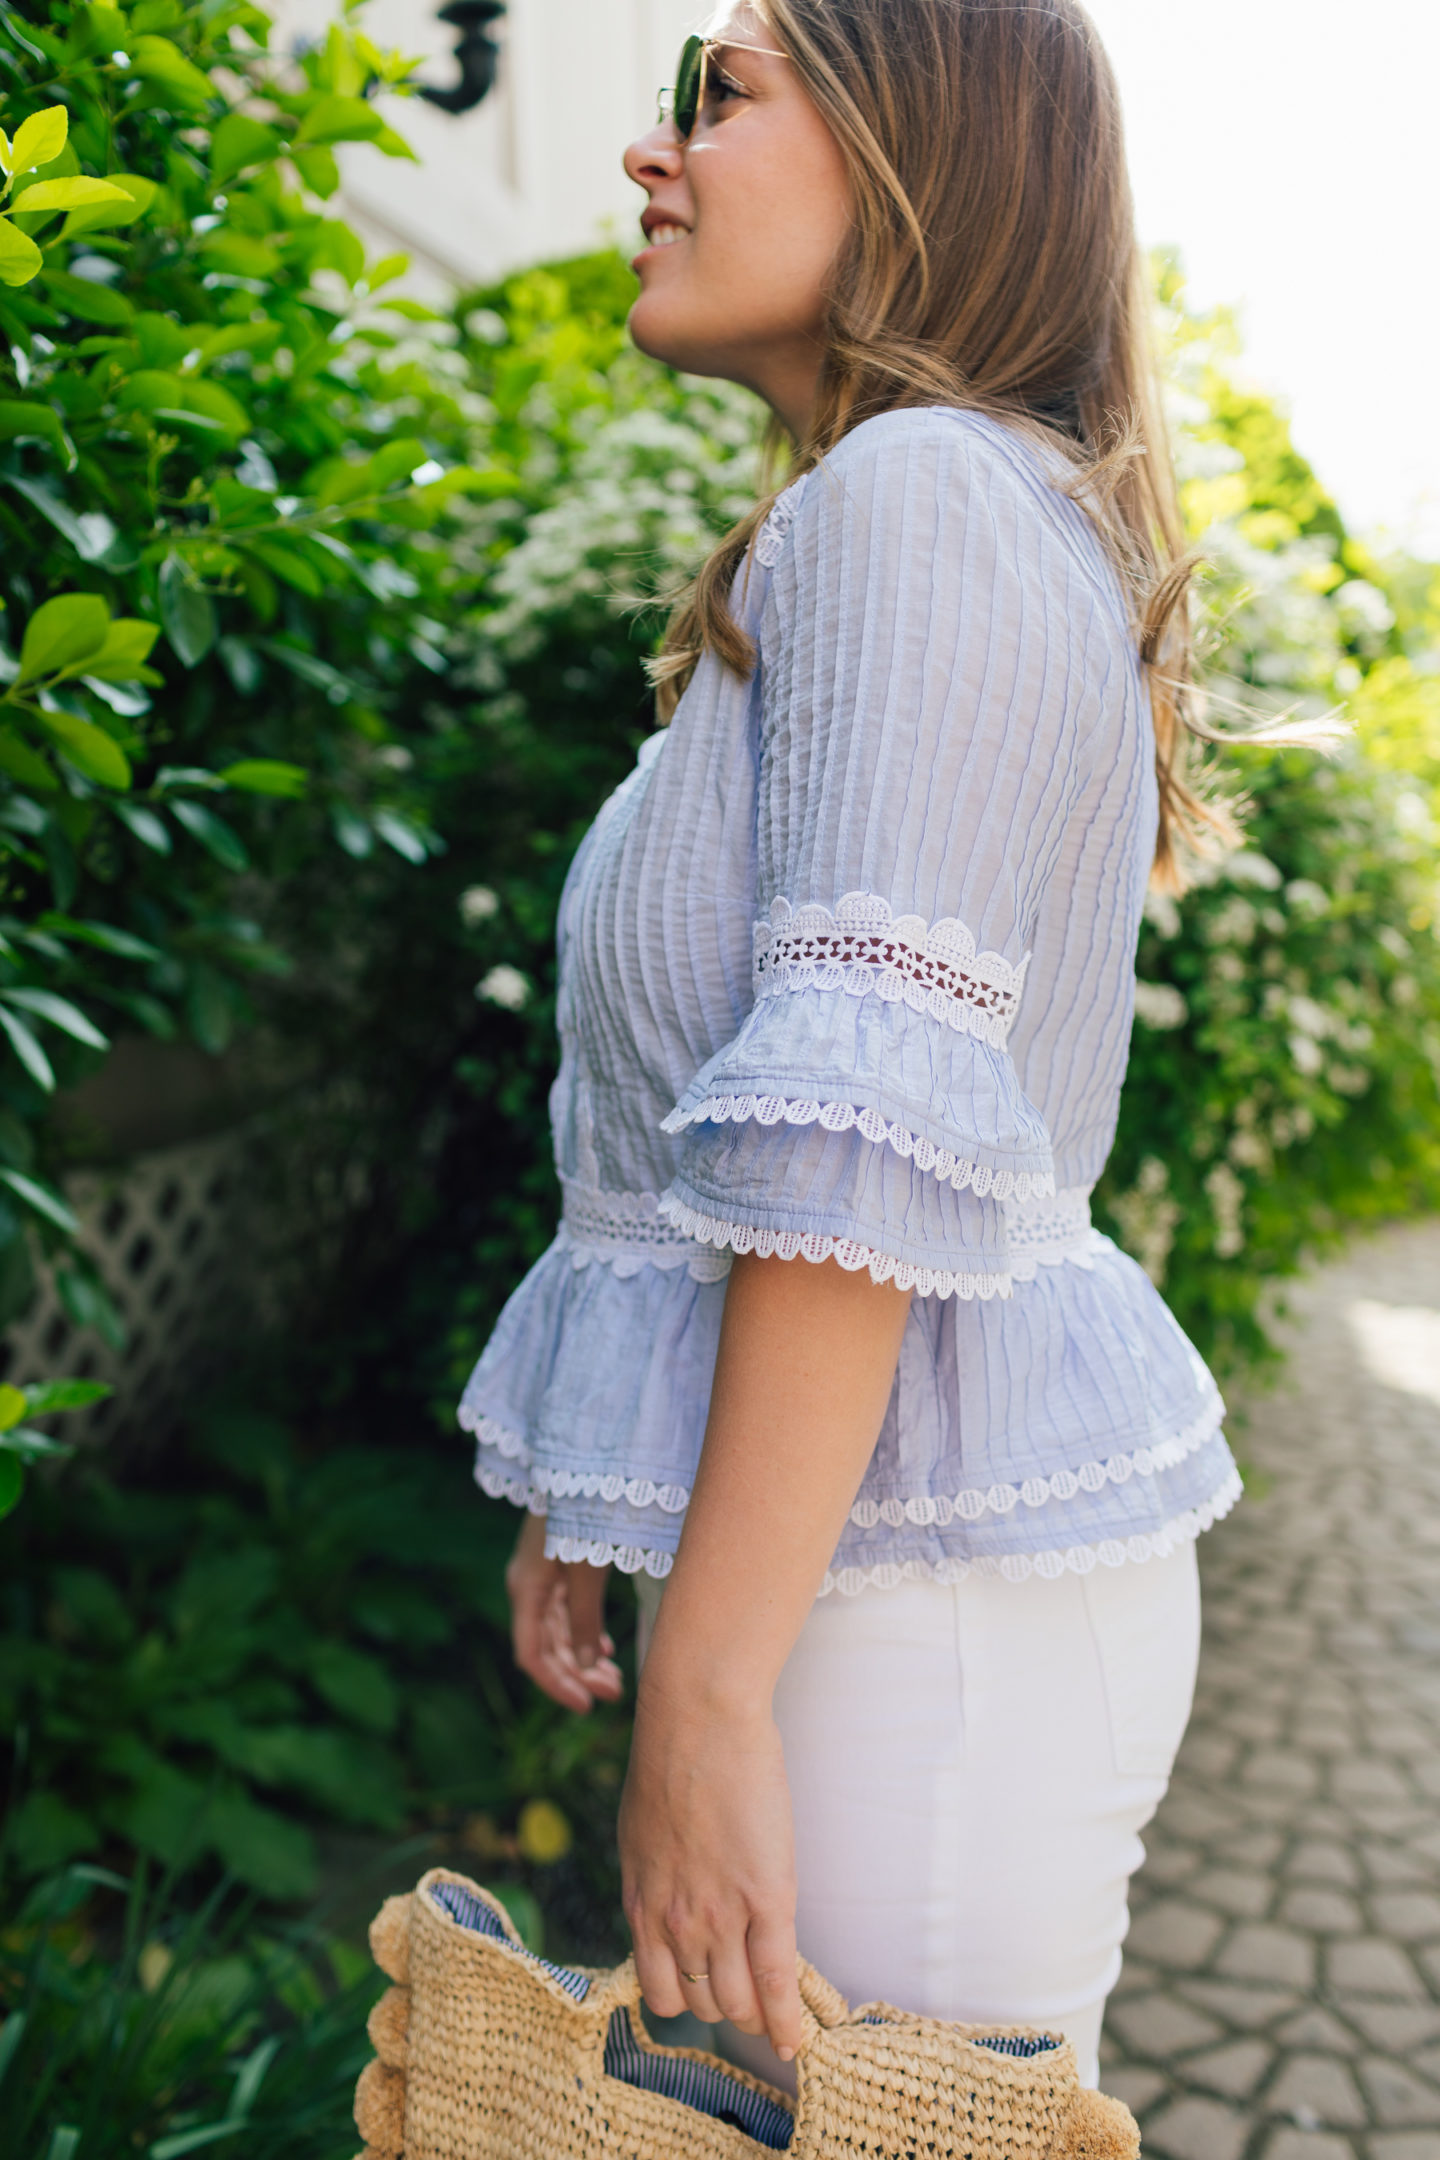 Emily Lucille Perfect Summer Top Post about the J.Crew Lace-Trimmed Short-Short Sleeve Top